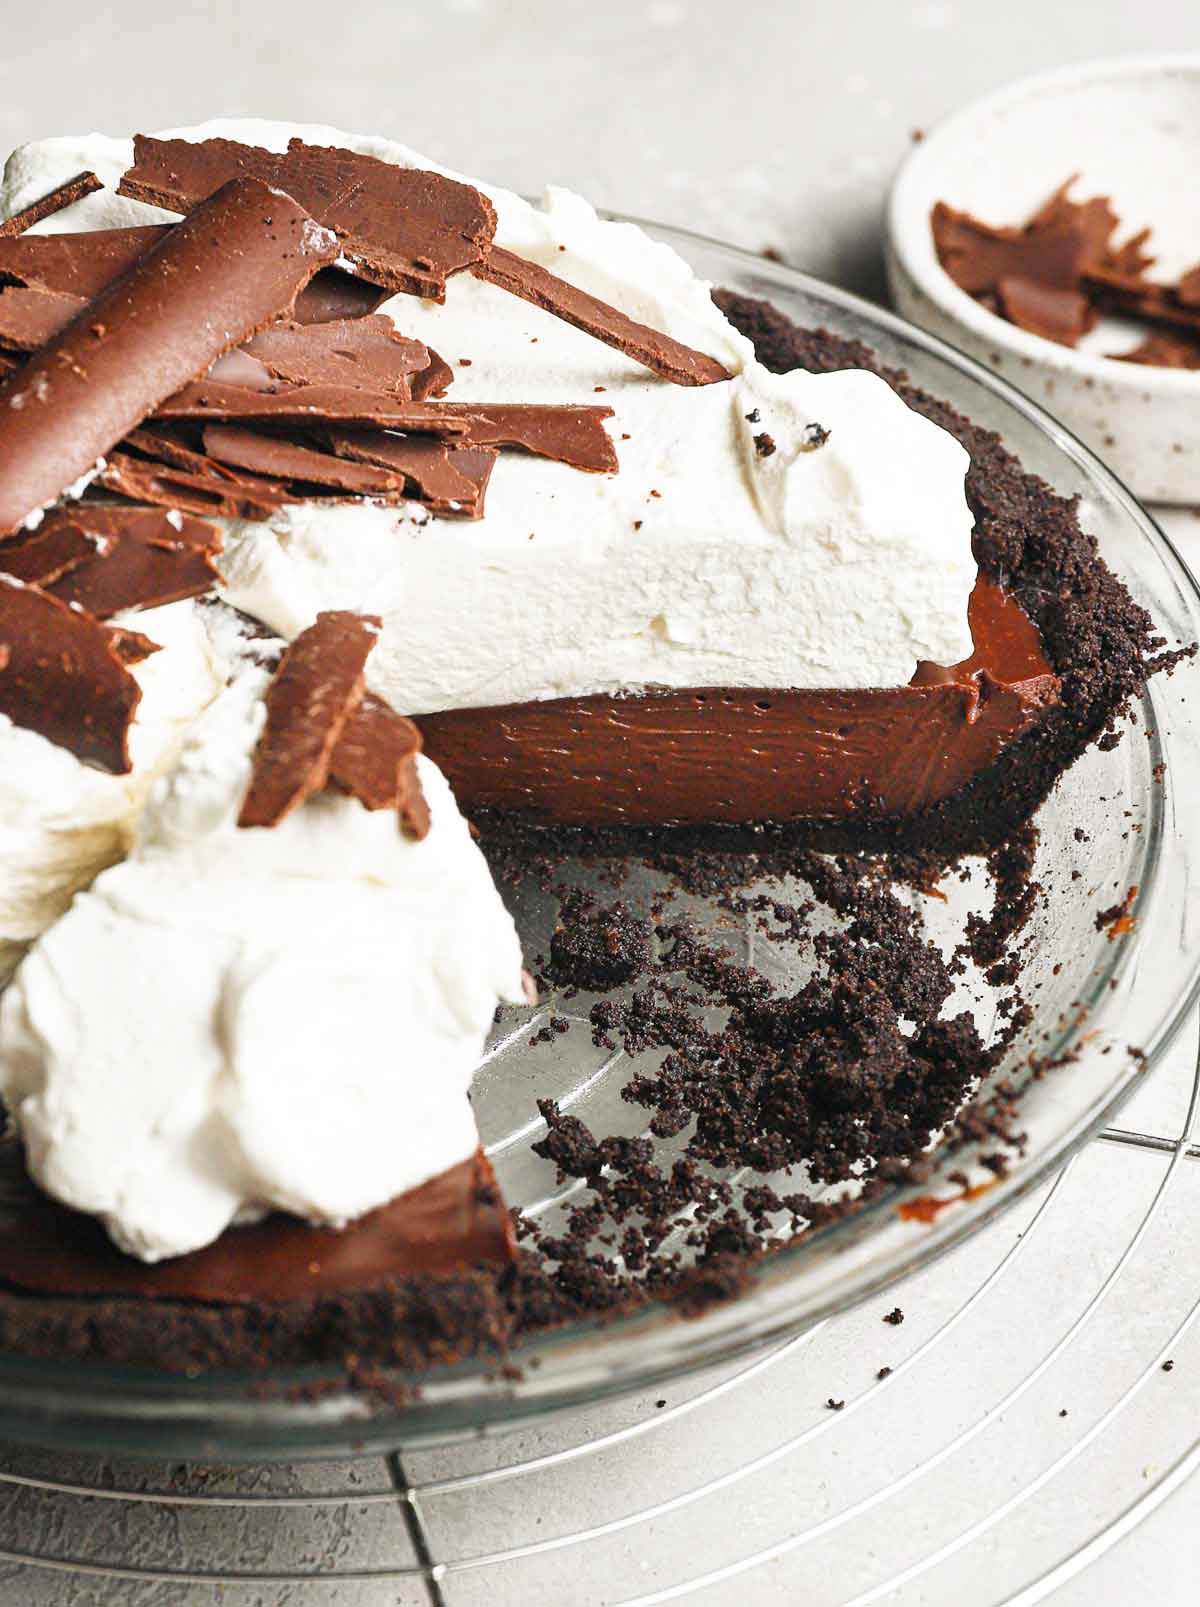 Chocolate cream pie covered in whipped cream and chocolate shavings in glass pie plate with one slice removed.